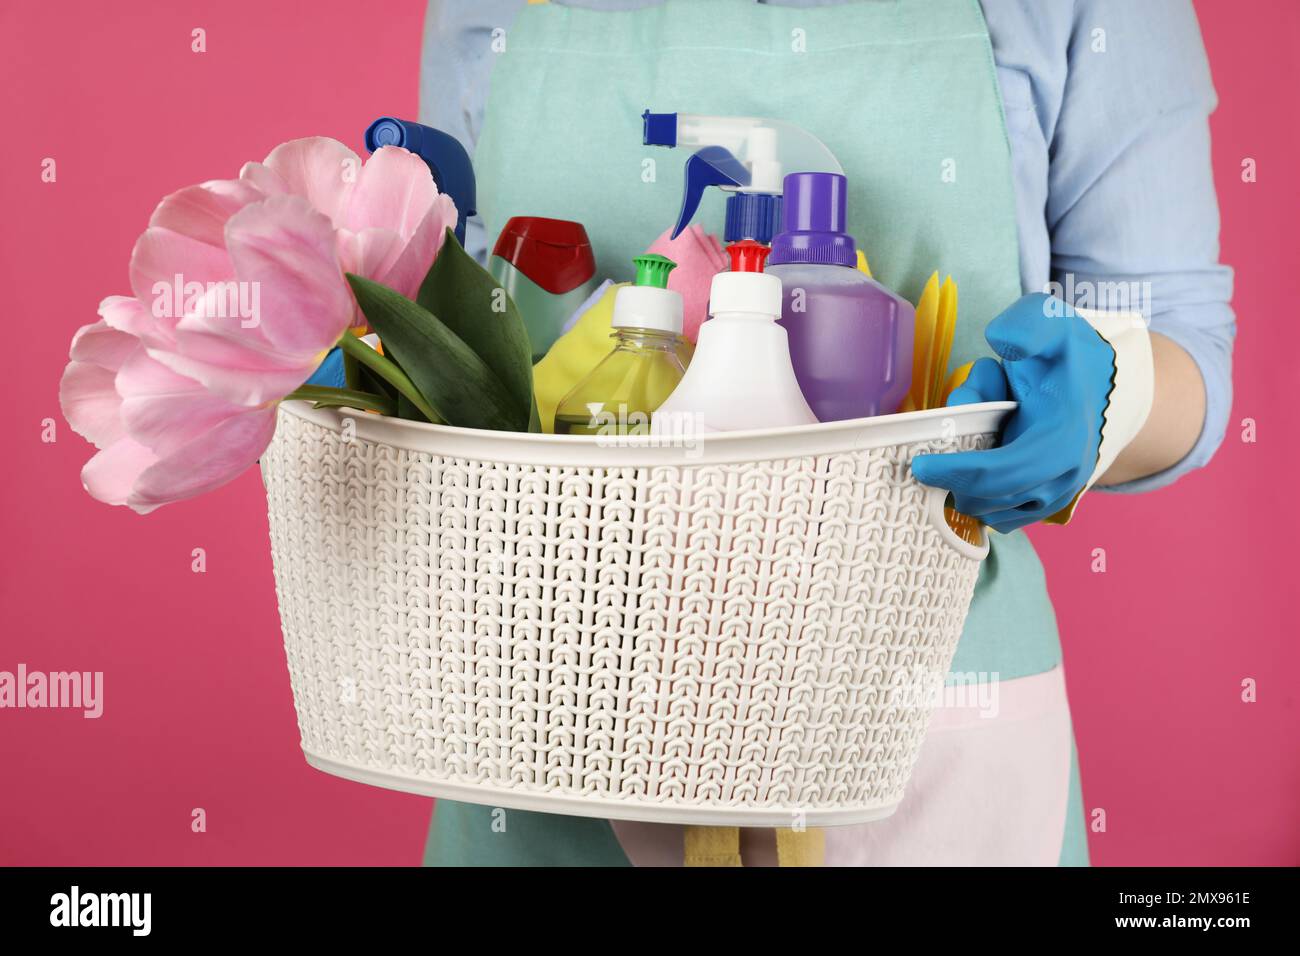 Woman holding basket with spring flowers and cleaning supplies on pink background, closeup Stock Photo